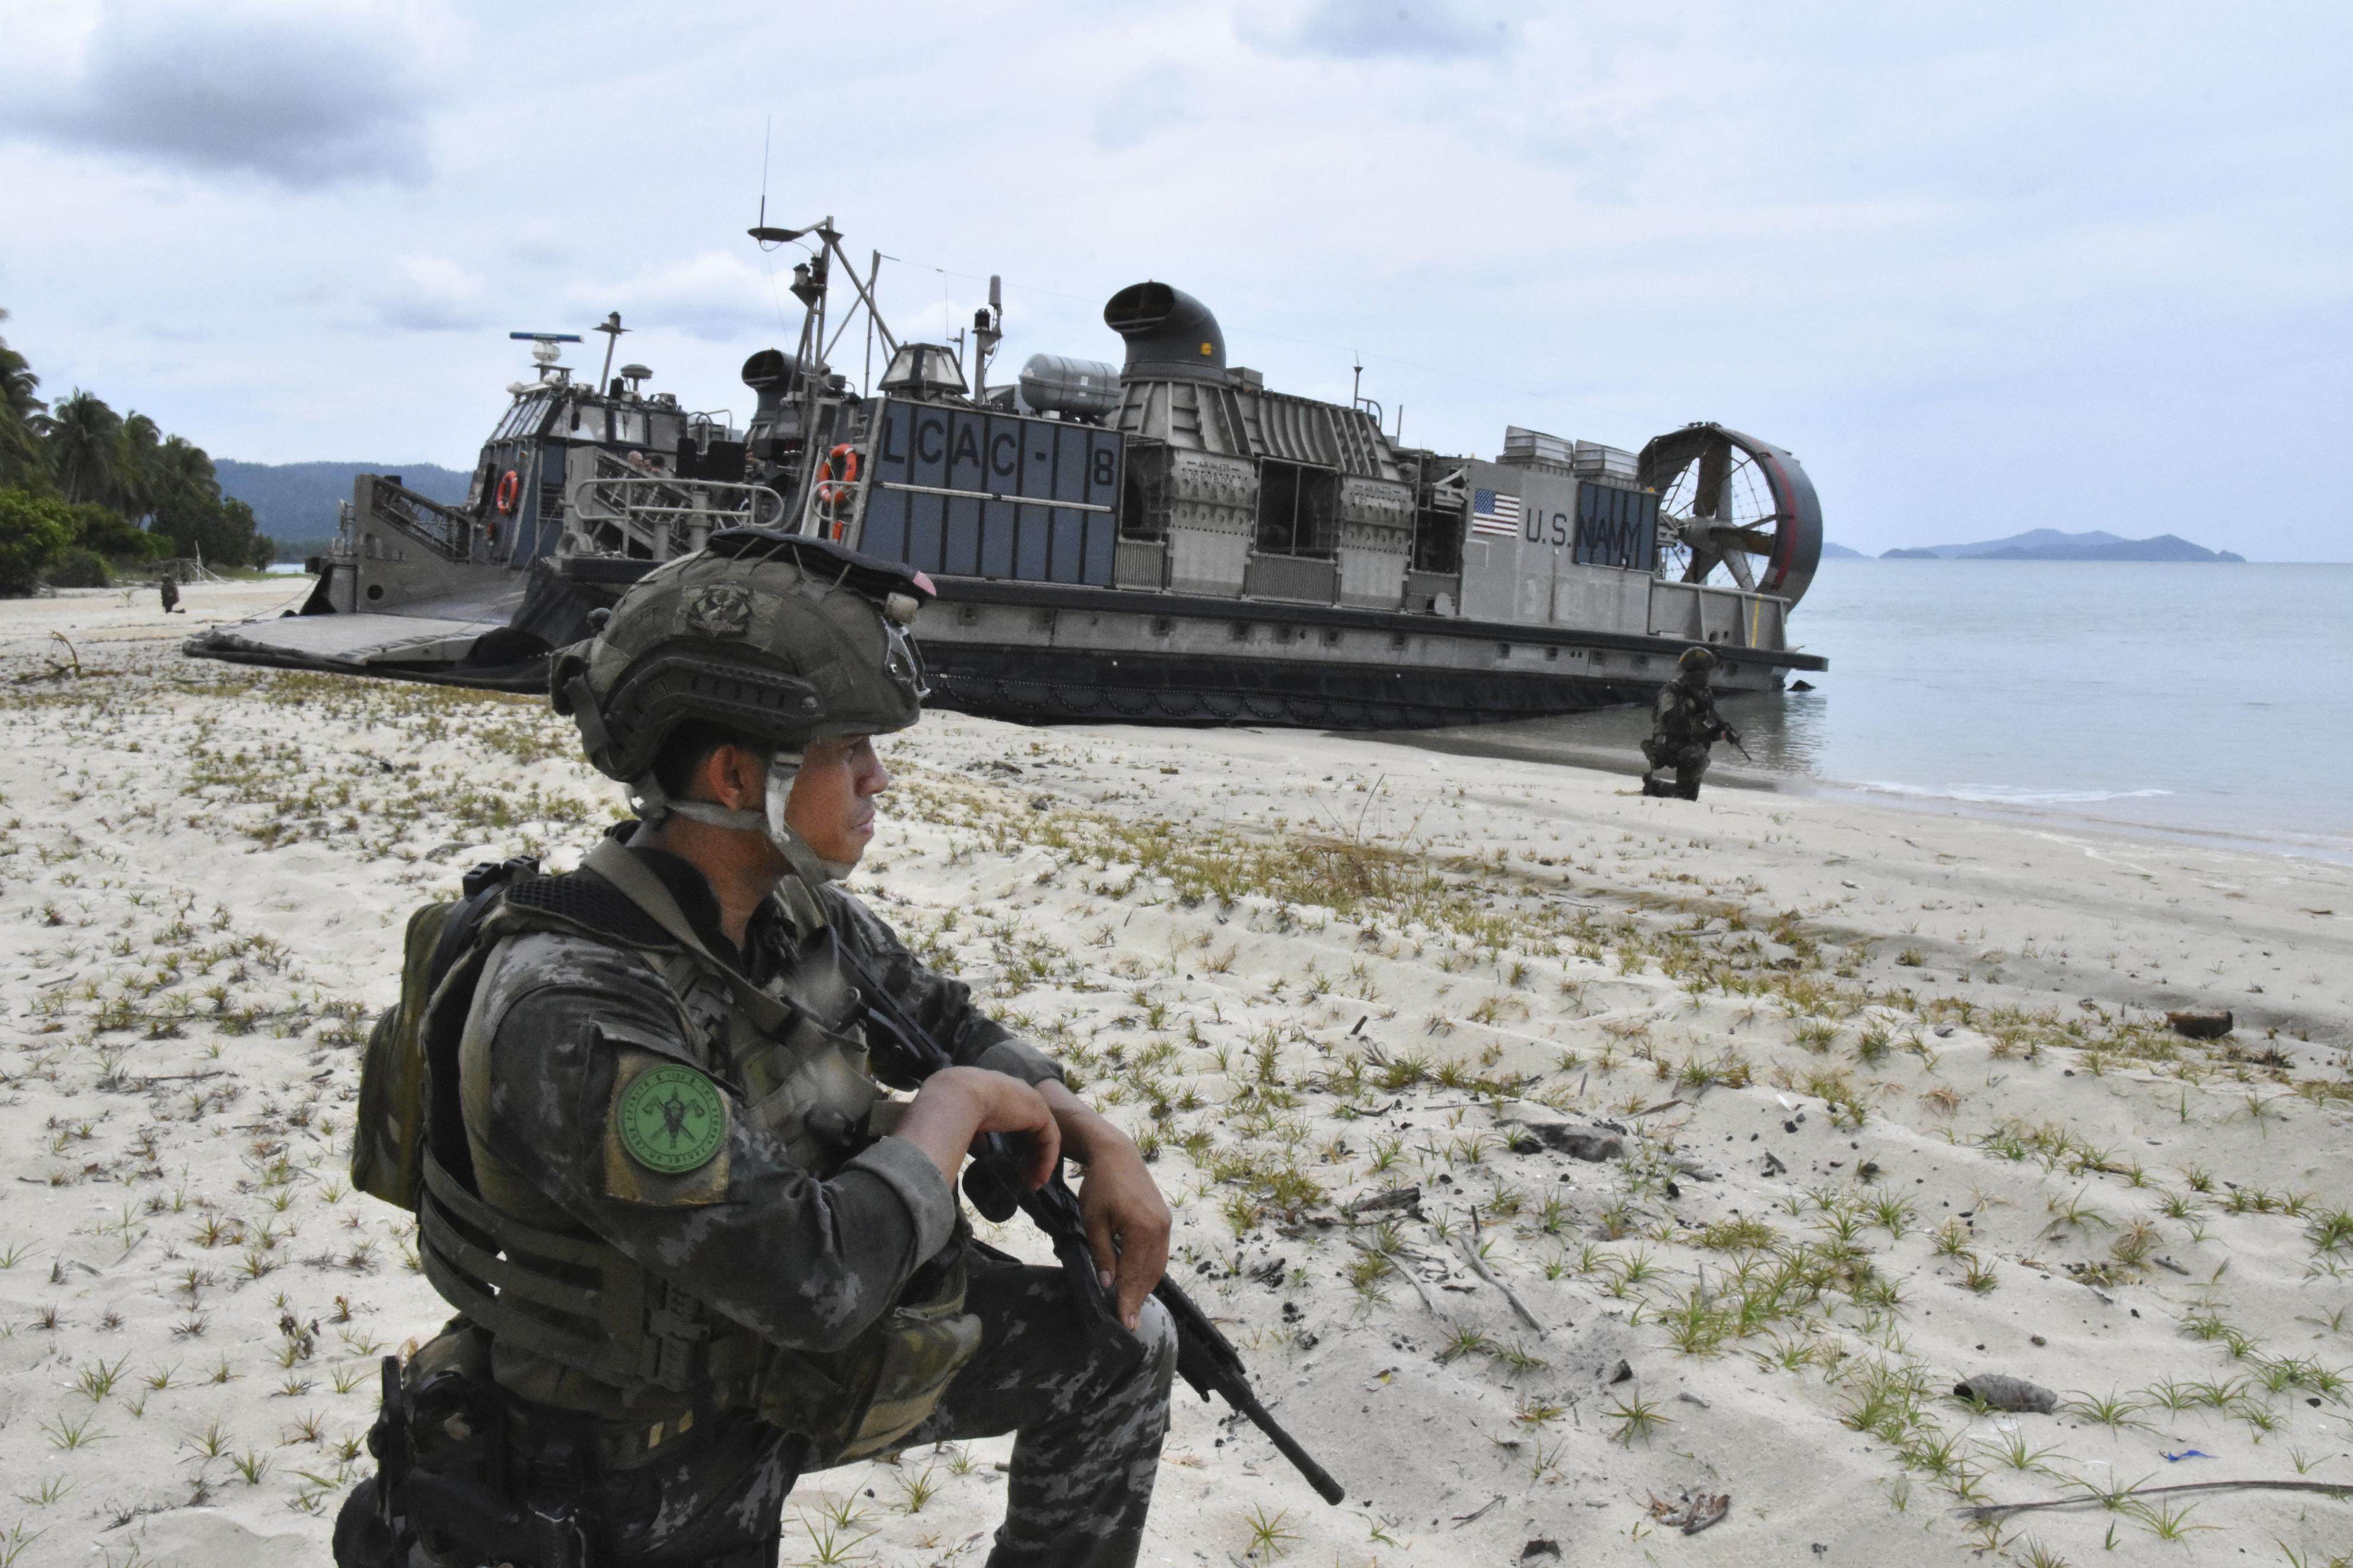 A Philippine soldier guards a US military hovercraft during the annual Balikatan bilateral military exercise on May 1 in San Vicente in Palawan province, the Philippines. Photo: Kyodo